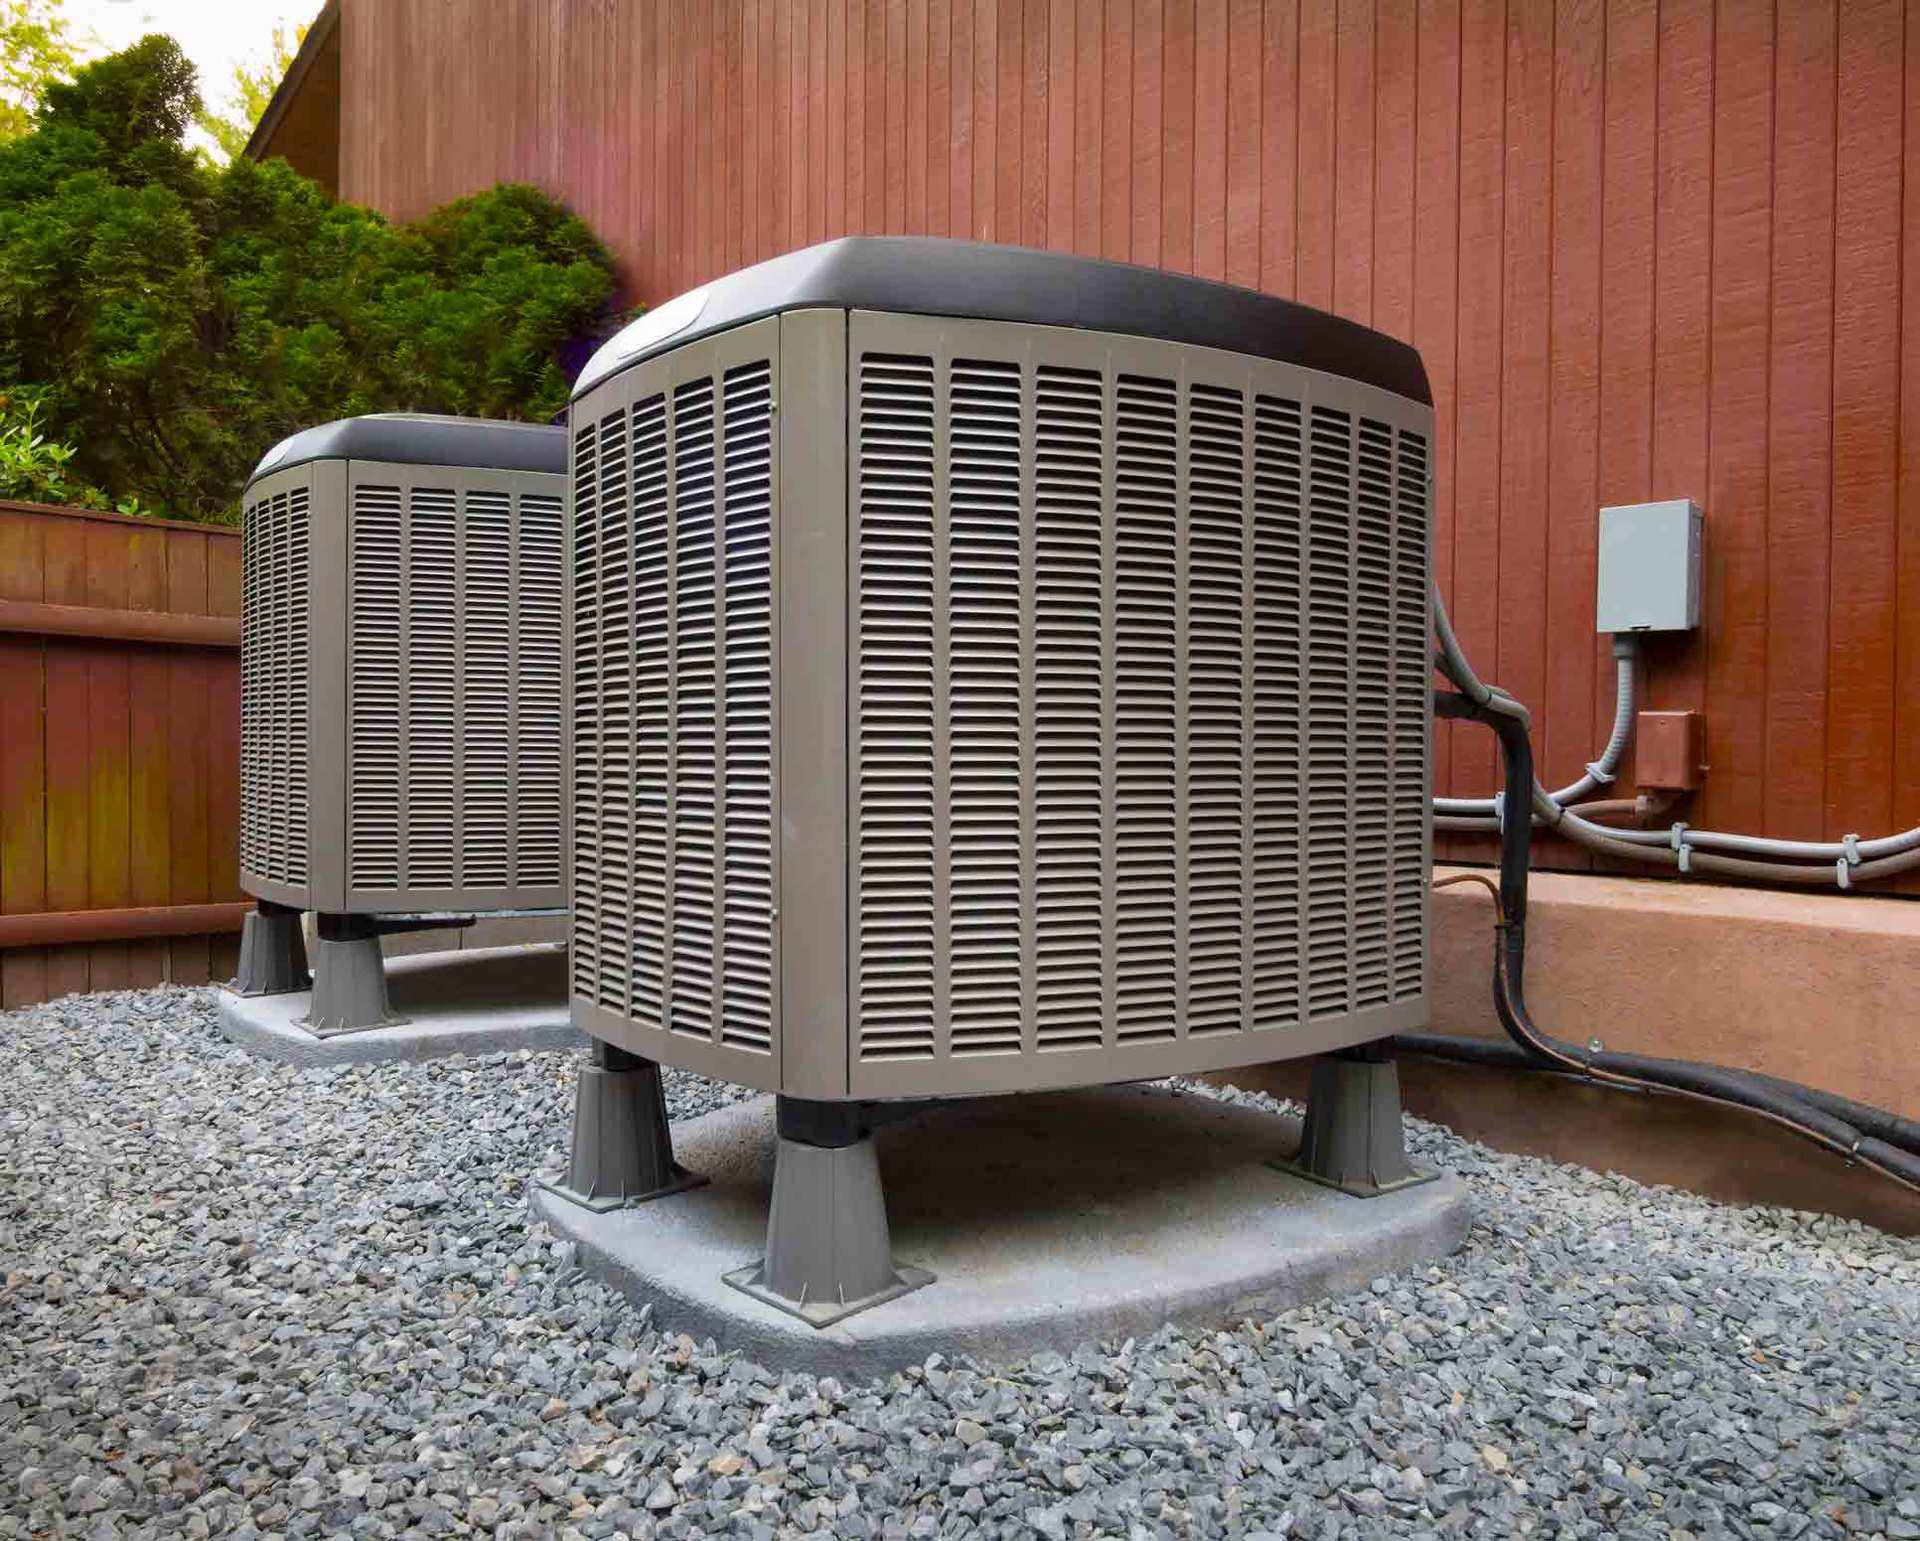 Evaporative ducted systems in Perth